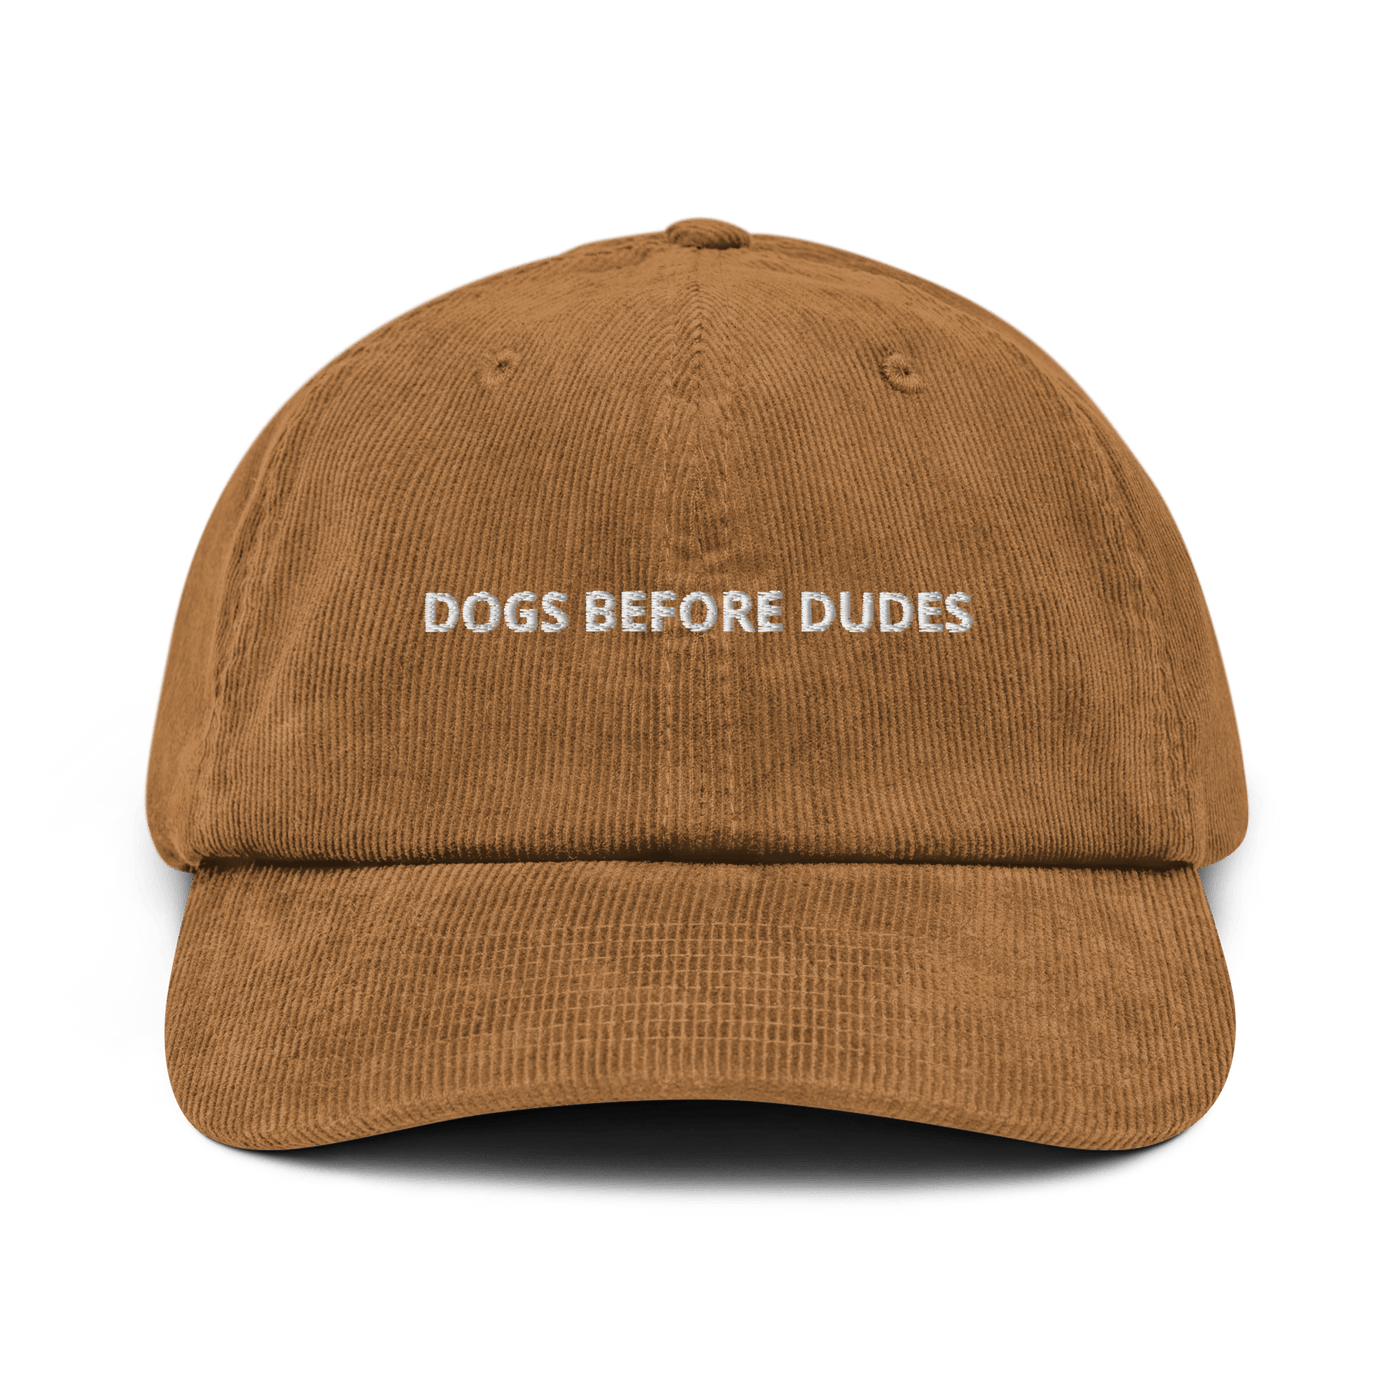 Dogs before Dudes Corduroy hat - Camel - - Just Another Cap Store